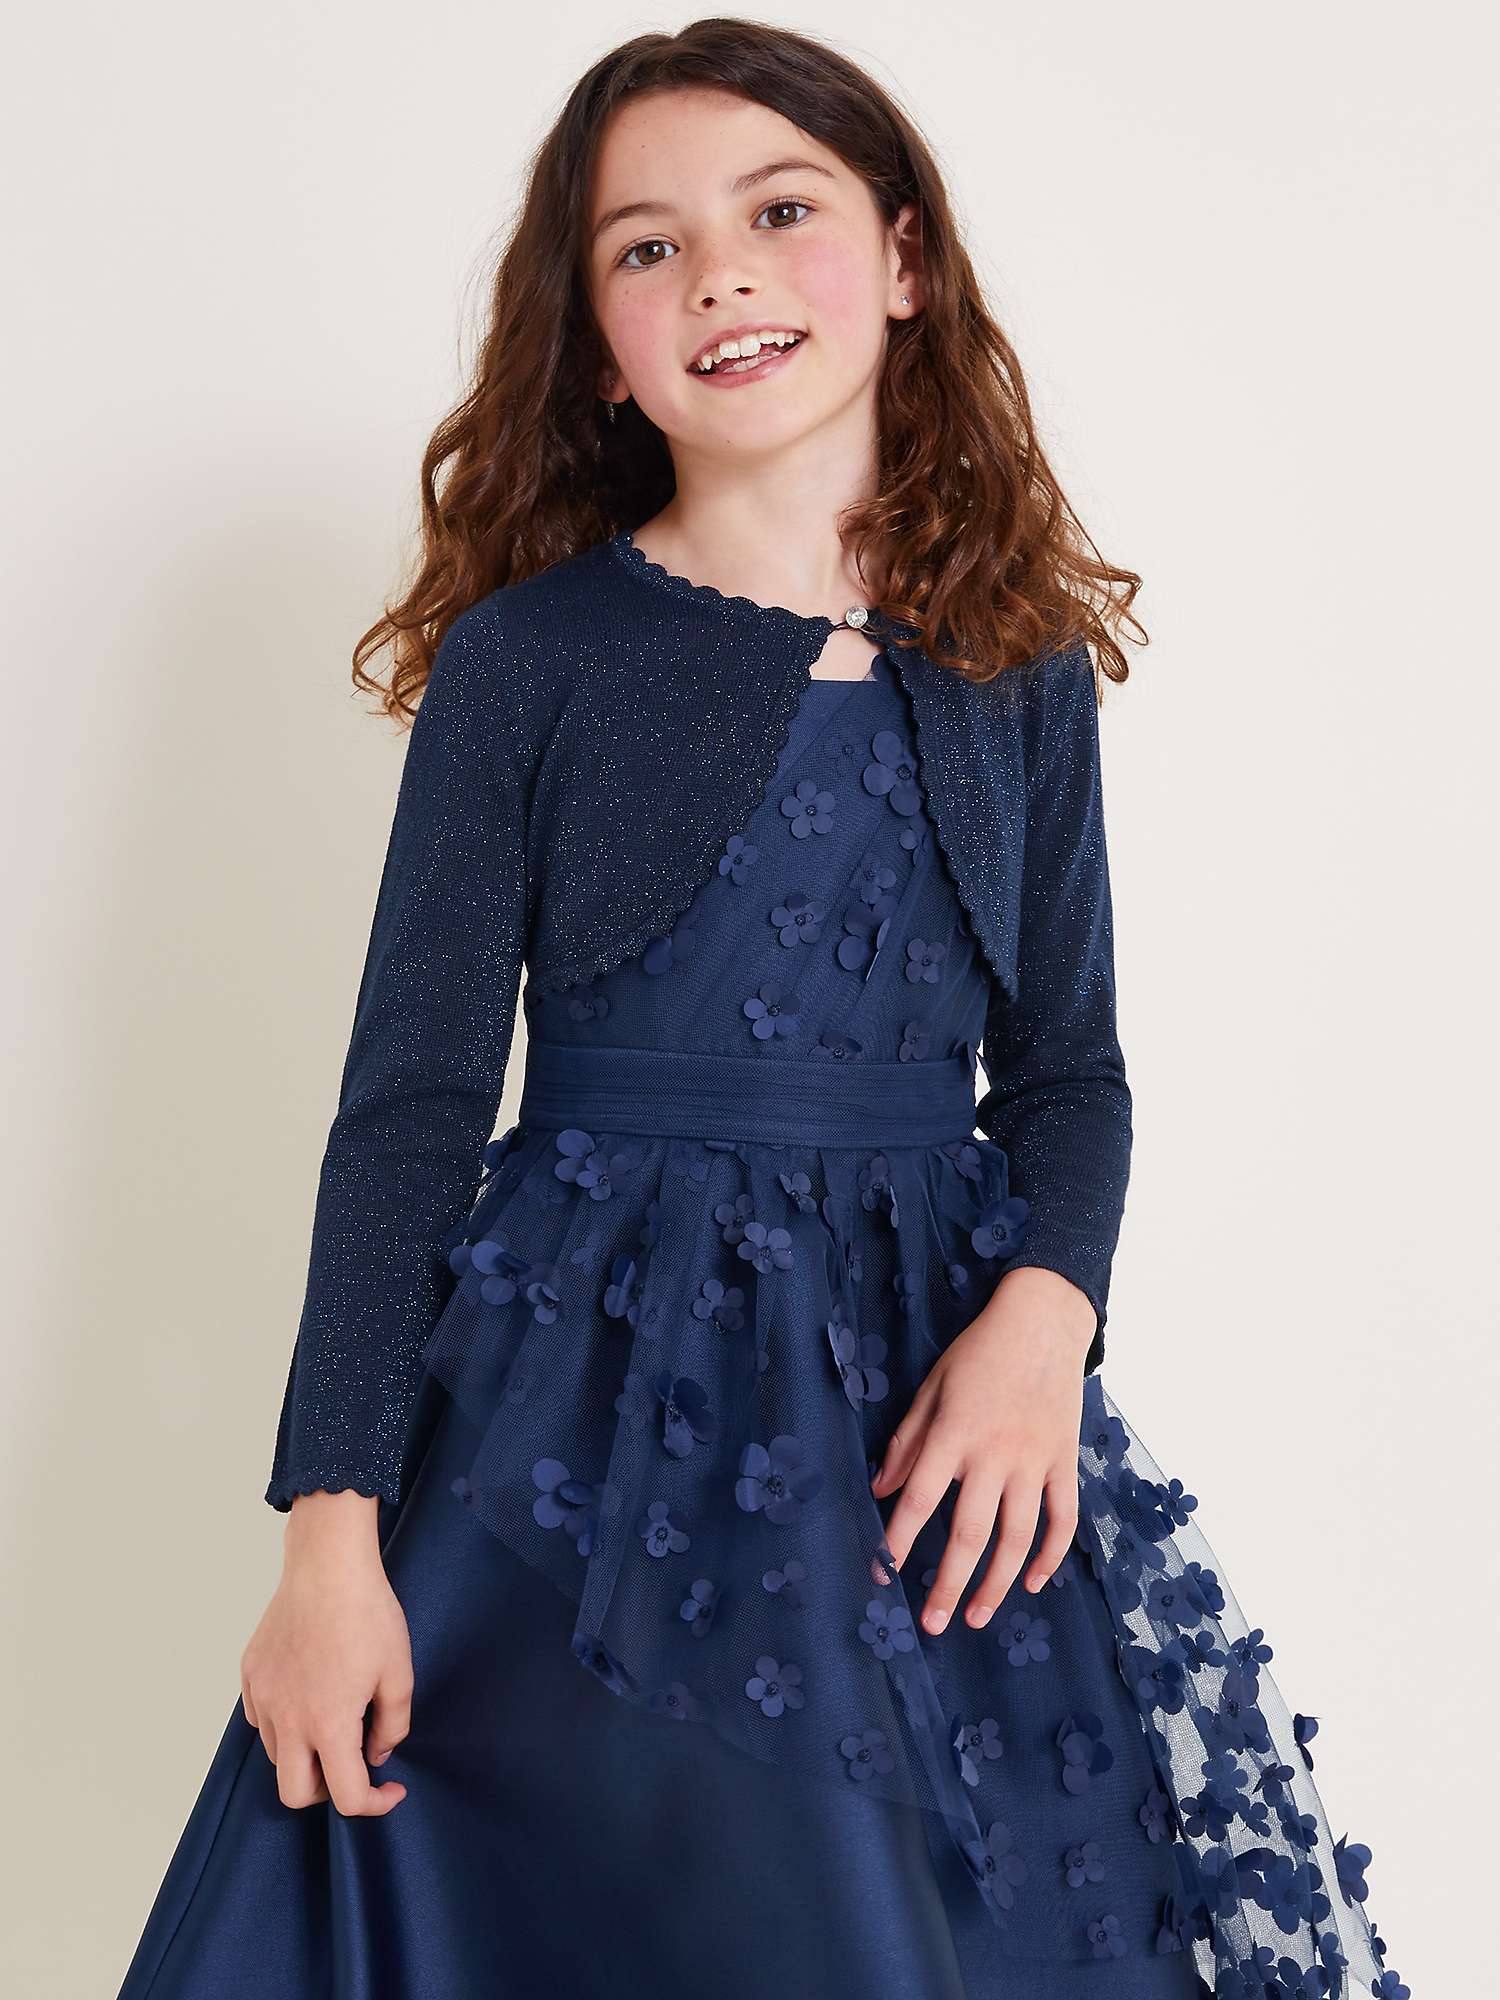 Buy Monsoon Kids' Niamh Scollop Sparkle Cardigan, Navy Online at johnlewis.com